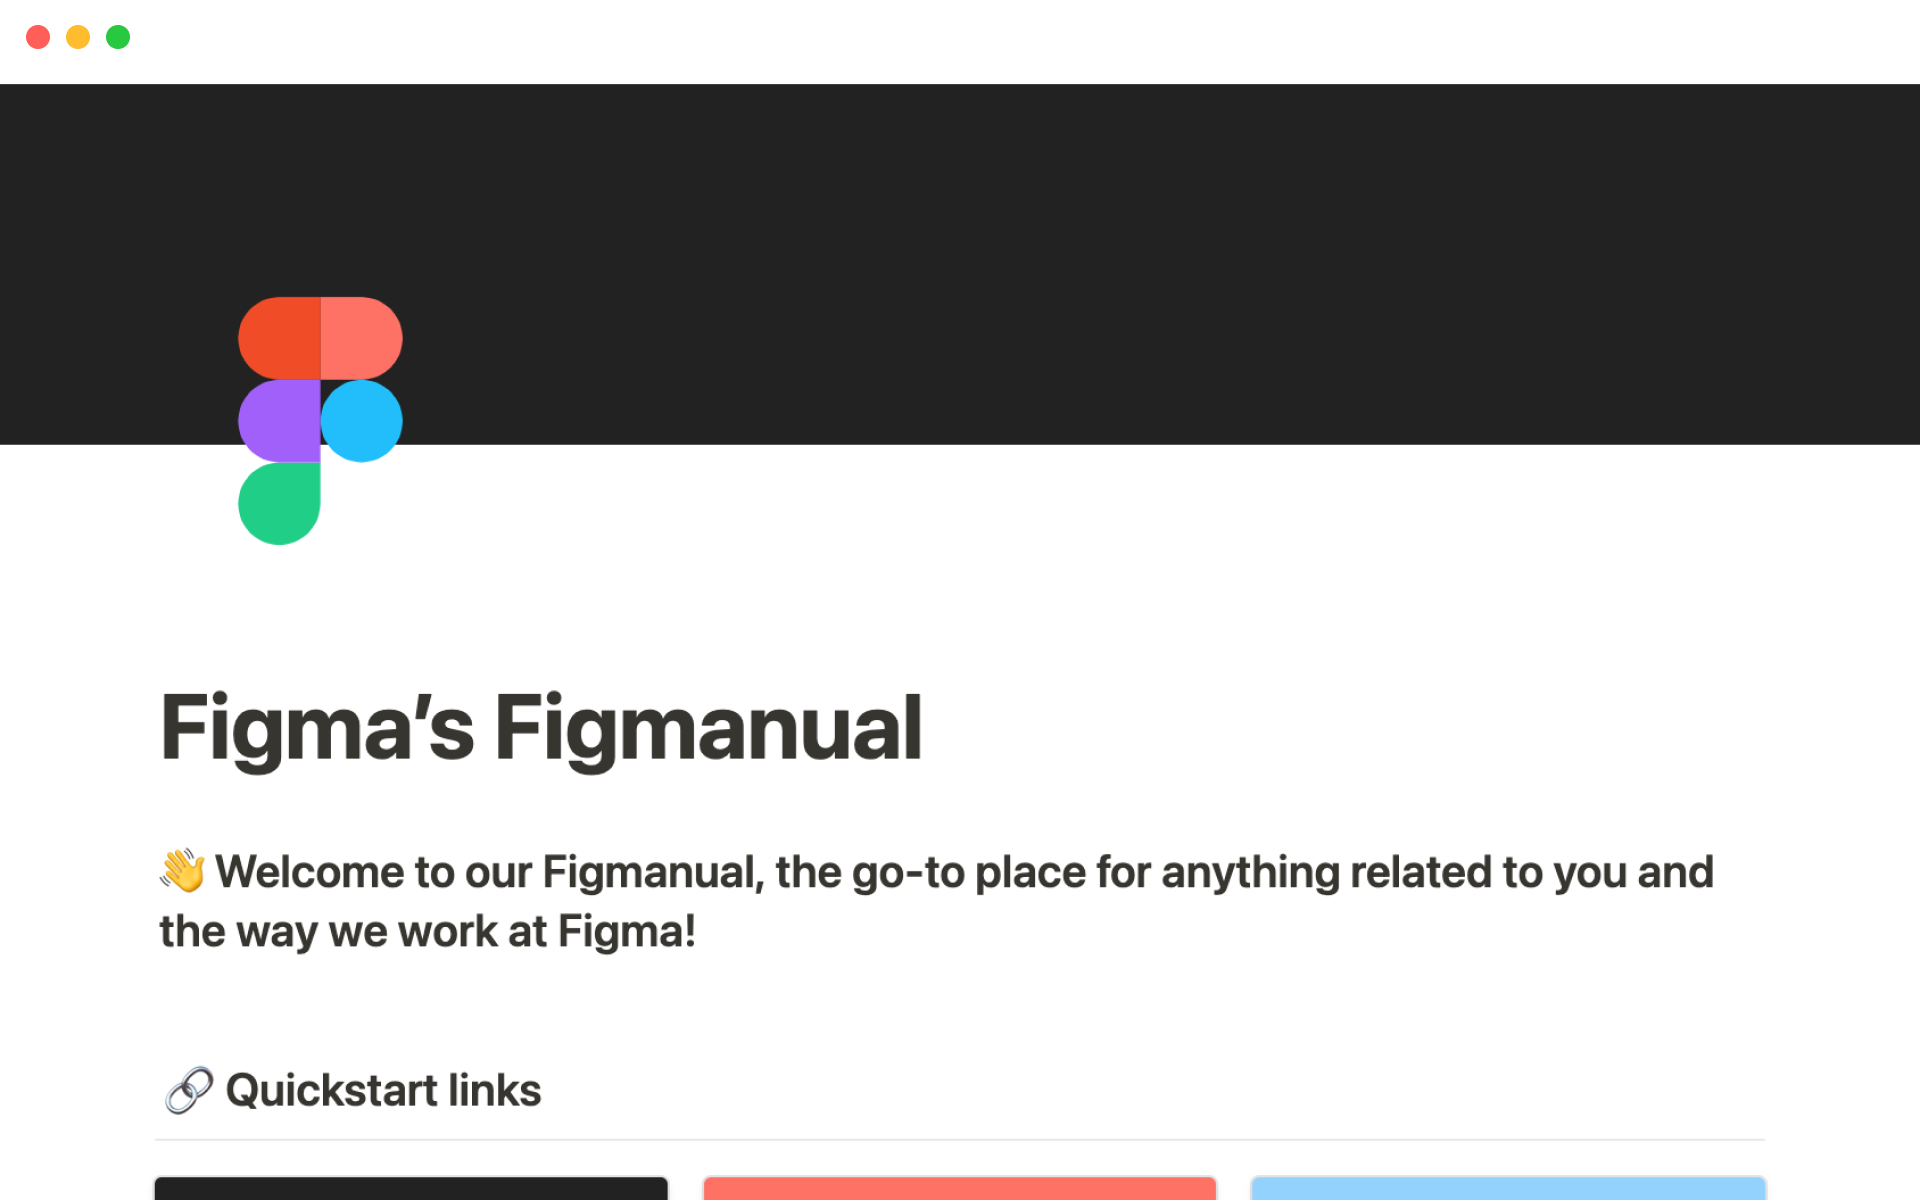 Figma's internal wiki is a one-stop resource for company information and policies.